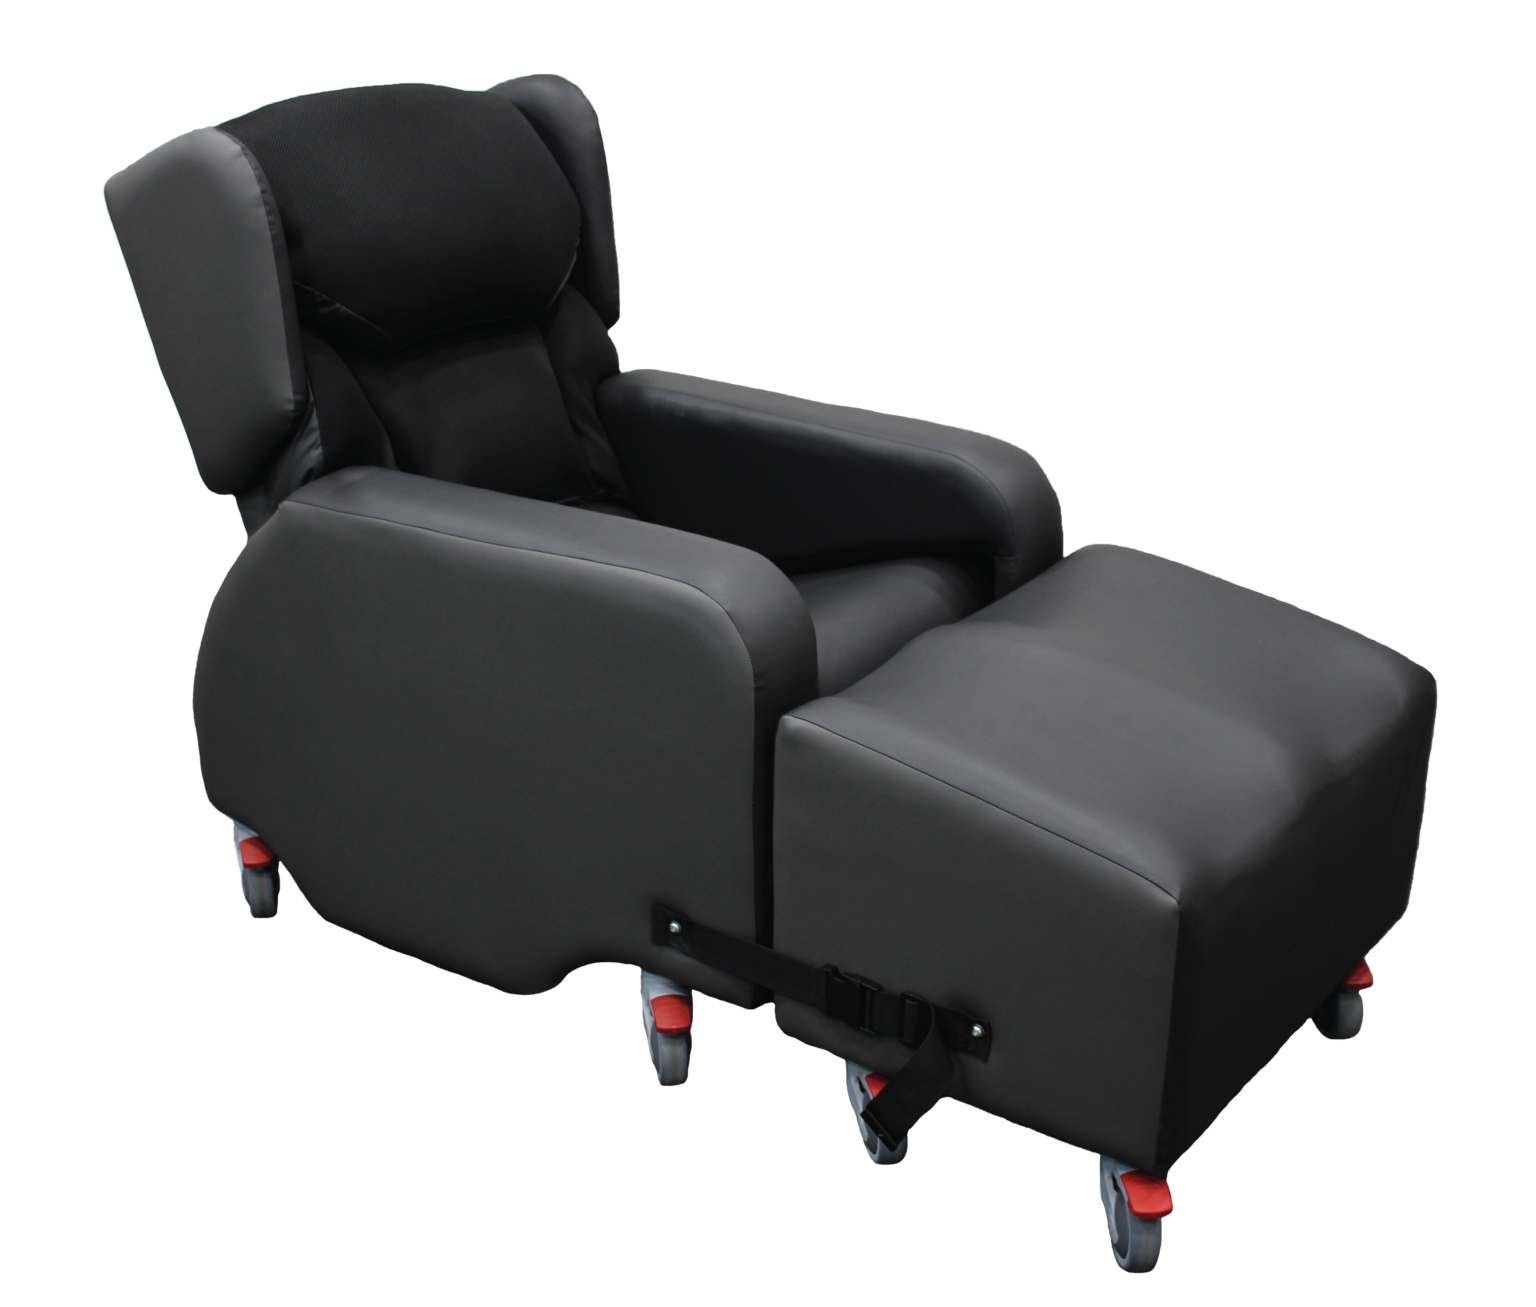 The incredibly comfortable cushioning throughout, makes the Lento Neuro Ward chair ideal for sitting for long periods of time.